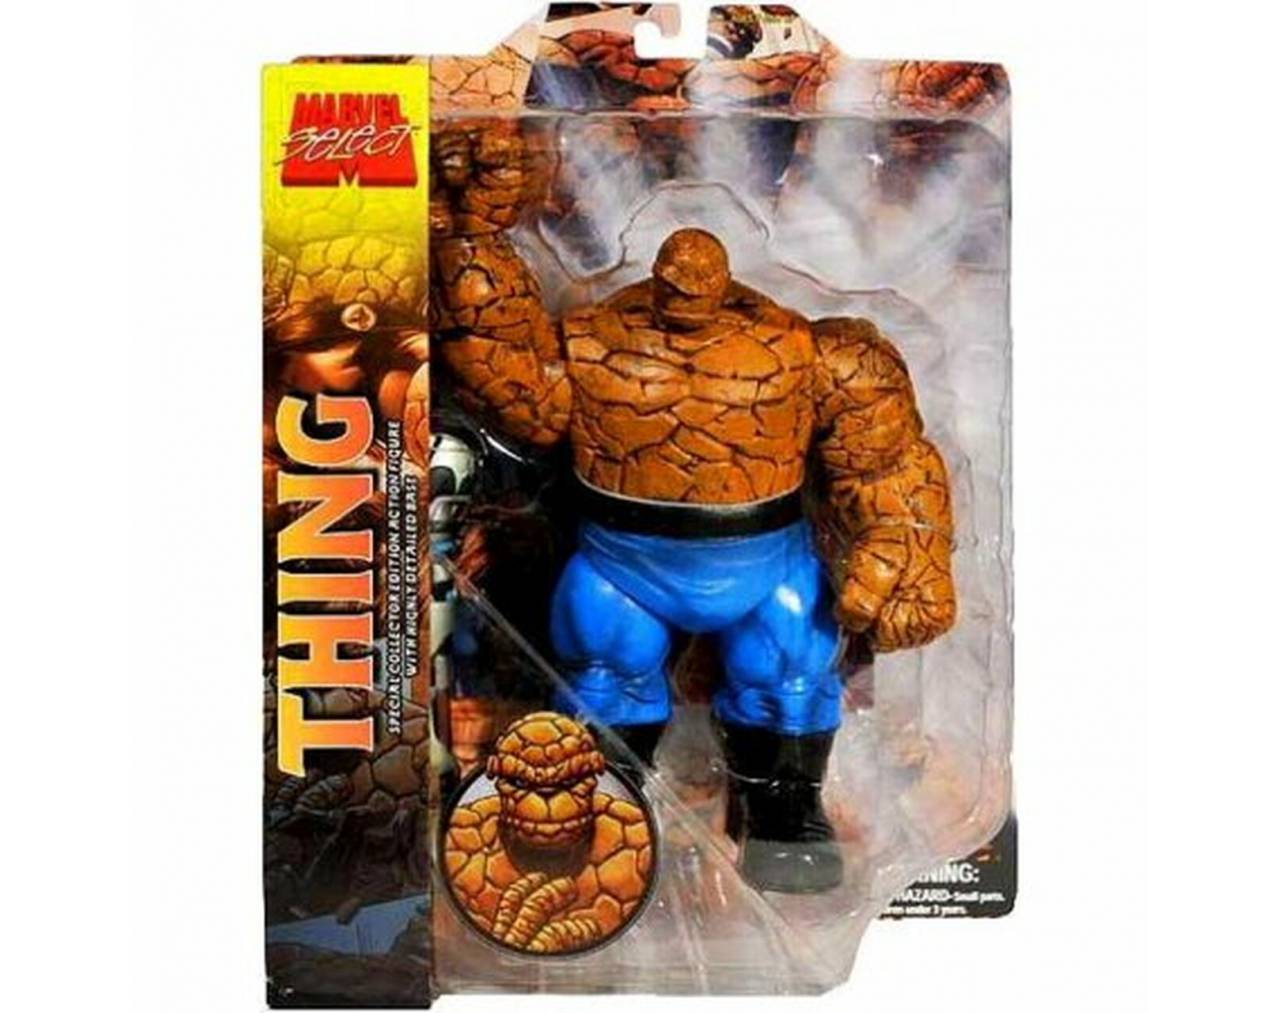 THING (MARVEL SELECT)